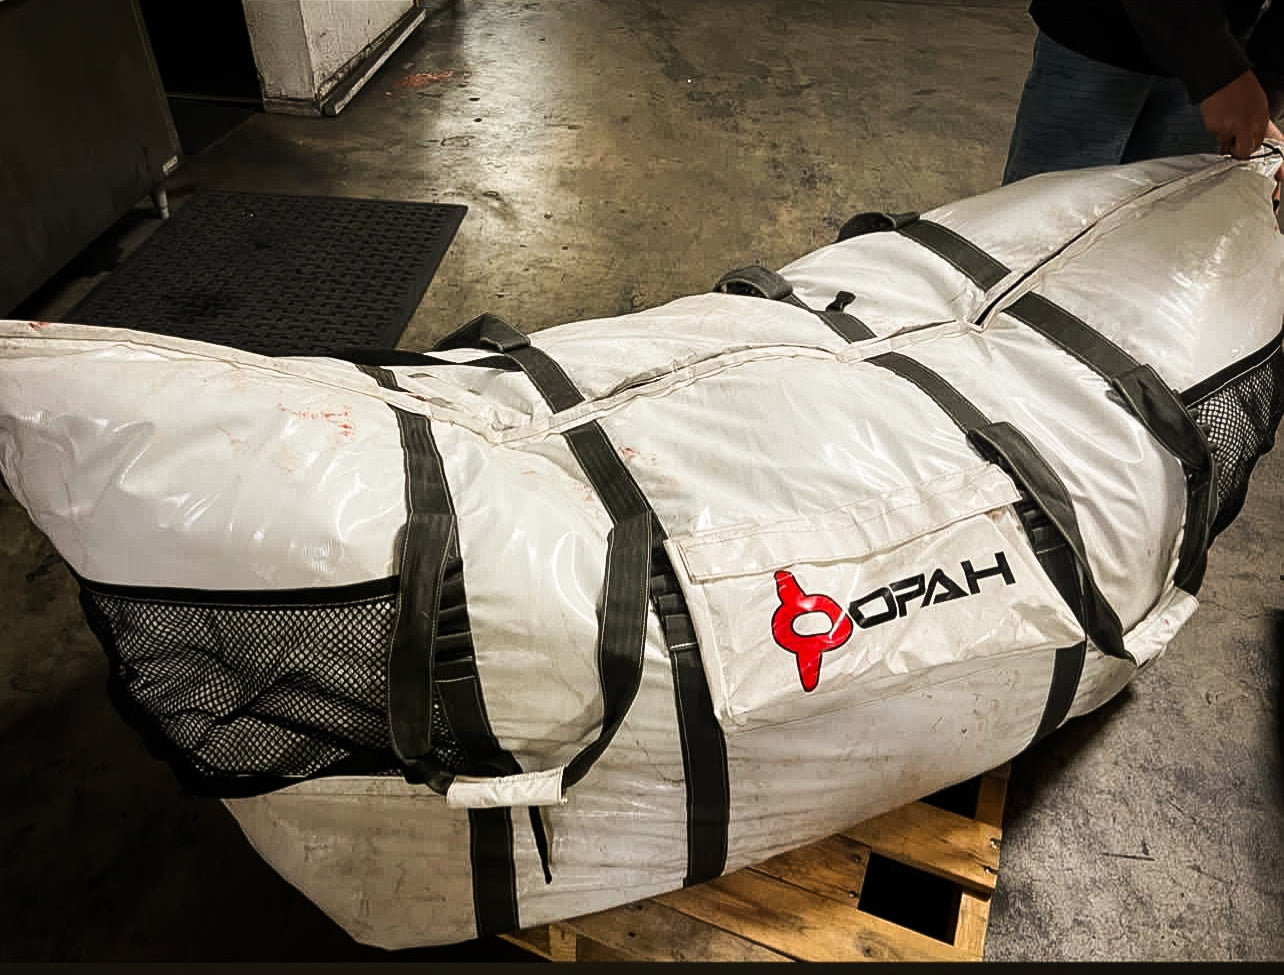 Opah Gear Fathom 7 King Fish Cooler Bag Kill Bag. Protect your catch longer. The most reliable fish bag on the market. Purposely built to be the highest quality fish cooler bag in sportfishing. Even great when used as an insulated cooler bag while out camping or for other normal use. The highest quality insulated bag. A perfect Tuna Kill Bag, Dorado Kill bag, or yellowtail kill bag.